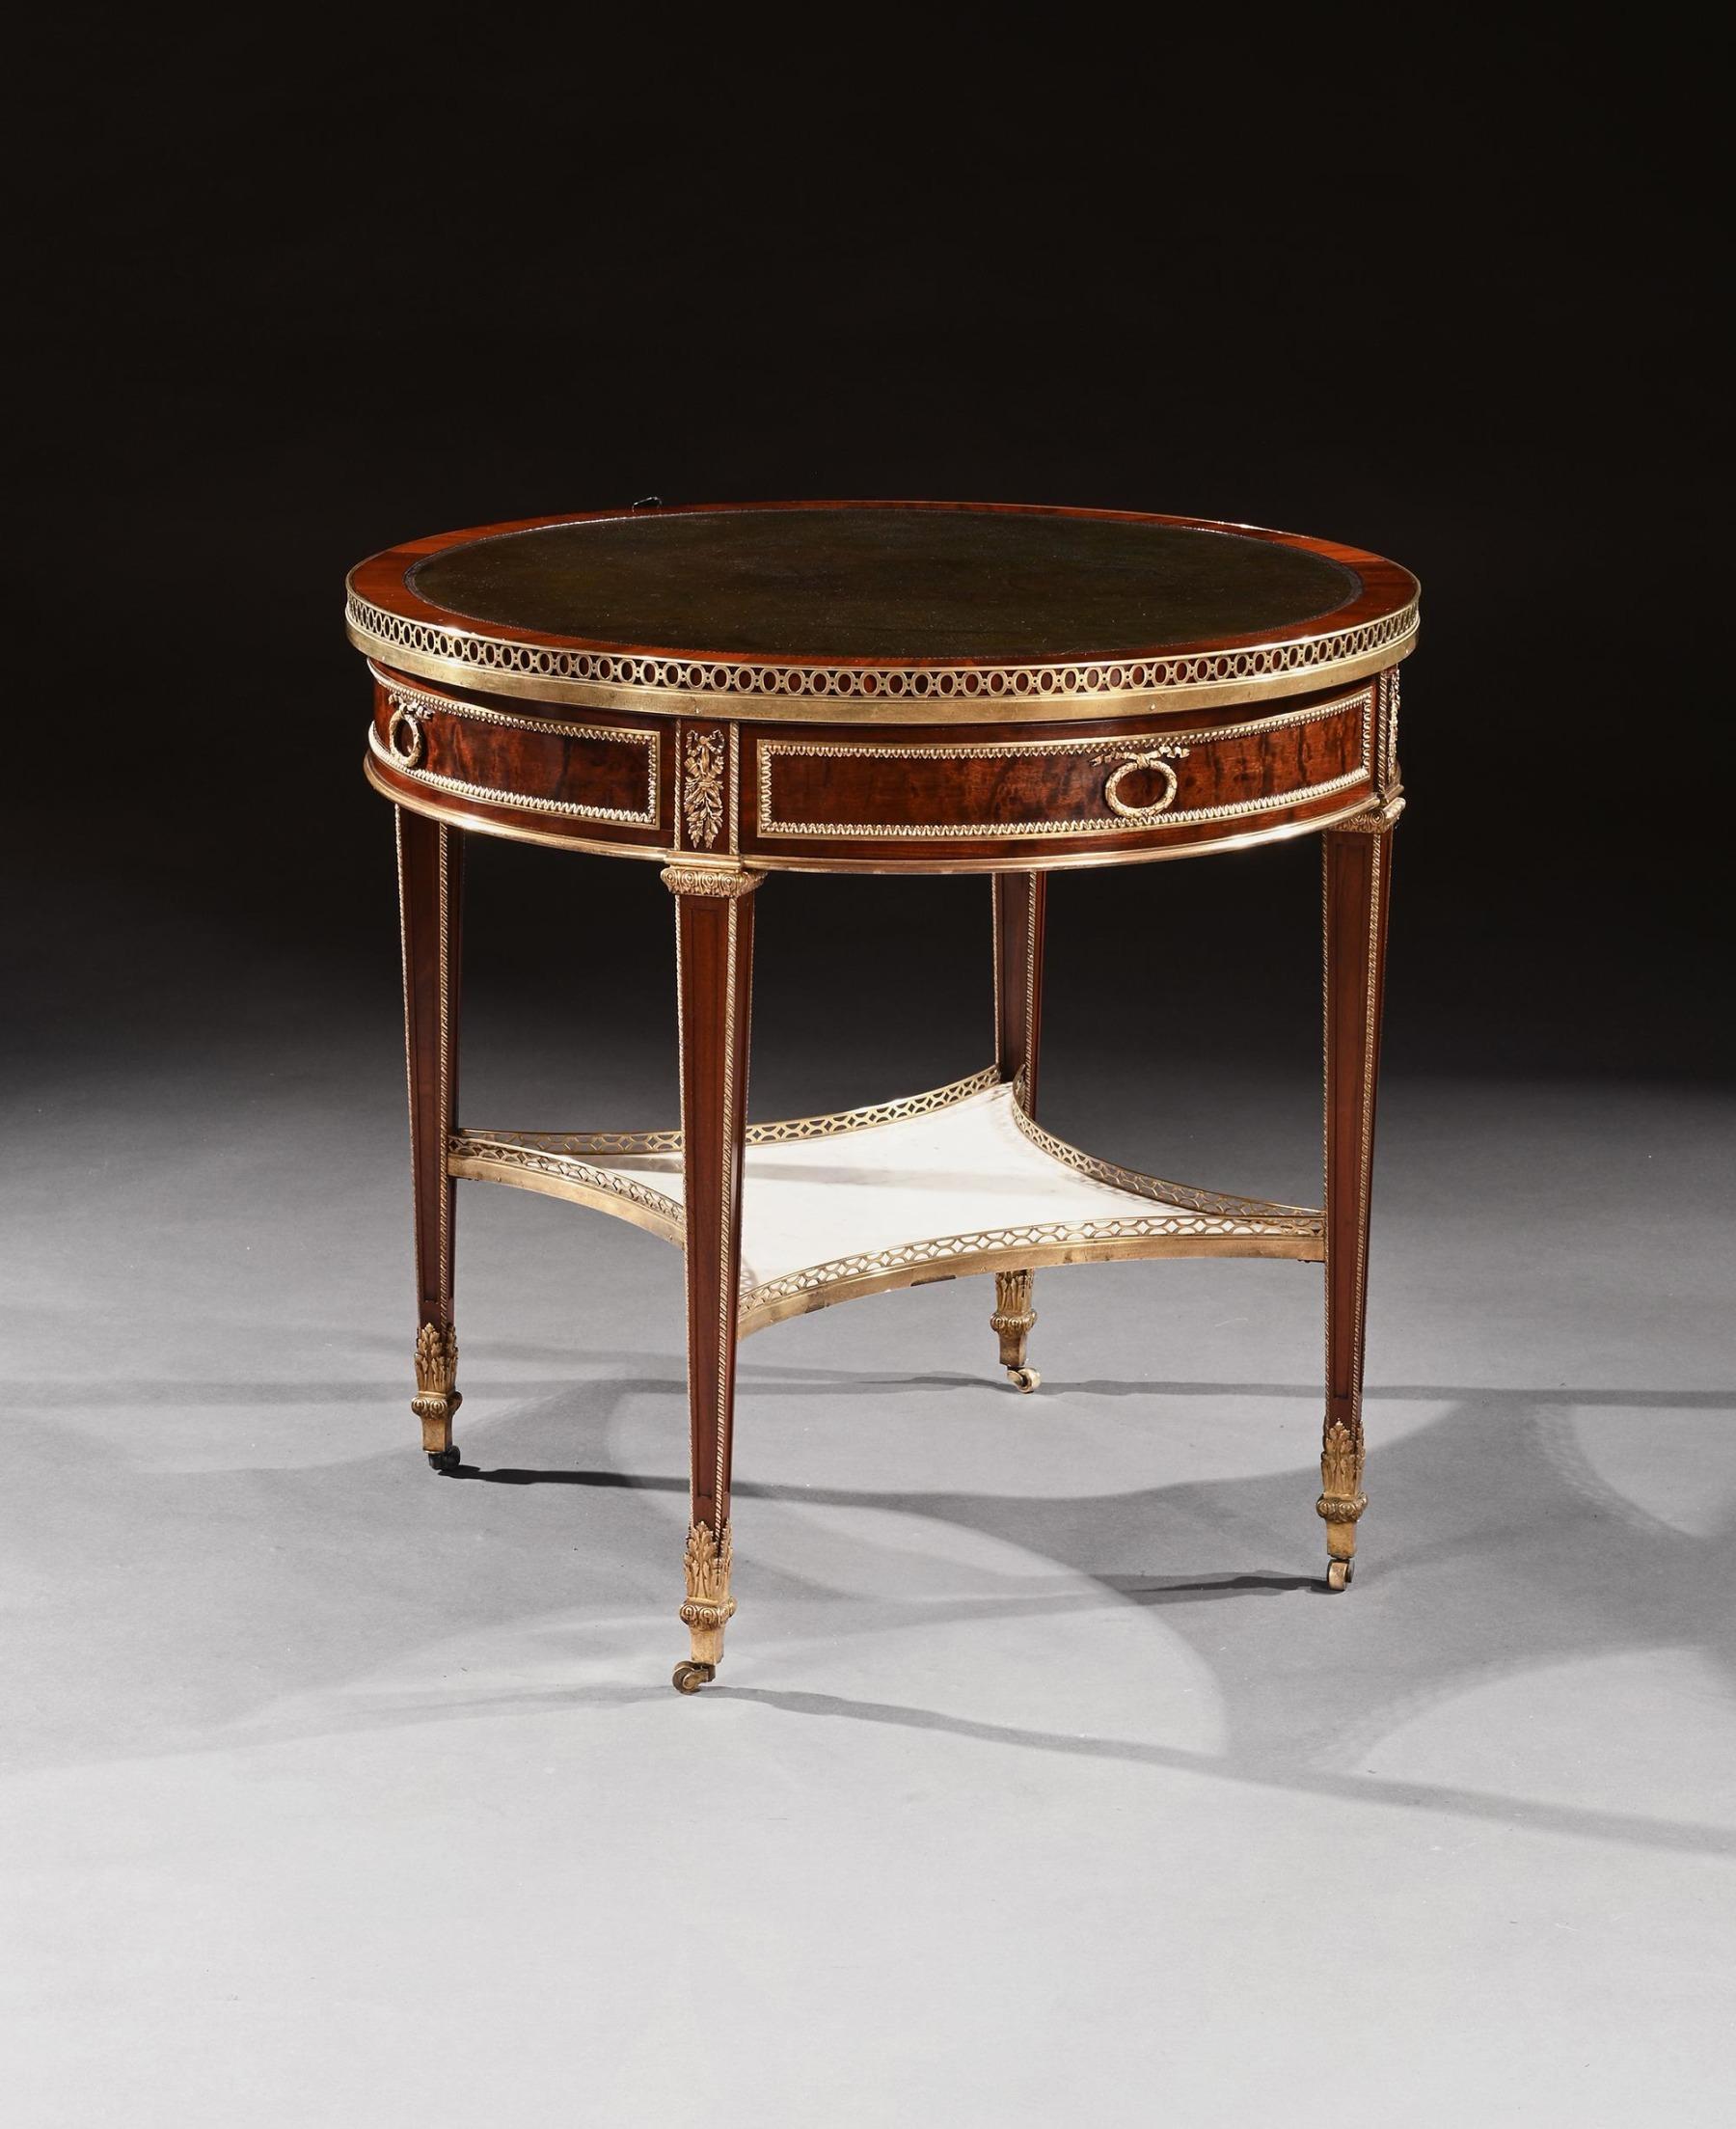 Exceptional G. Durand 19th C. Mahogany & Gilt Bronze Gueridon Bouillotte Table 6